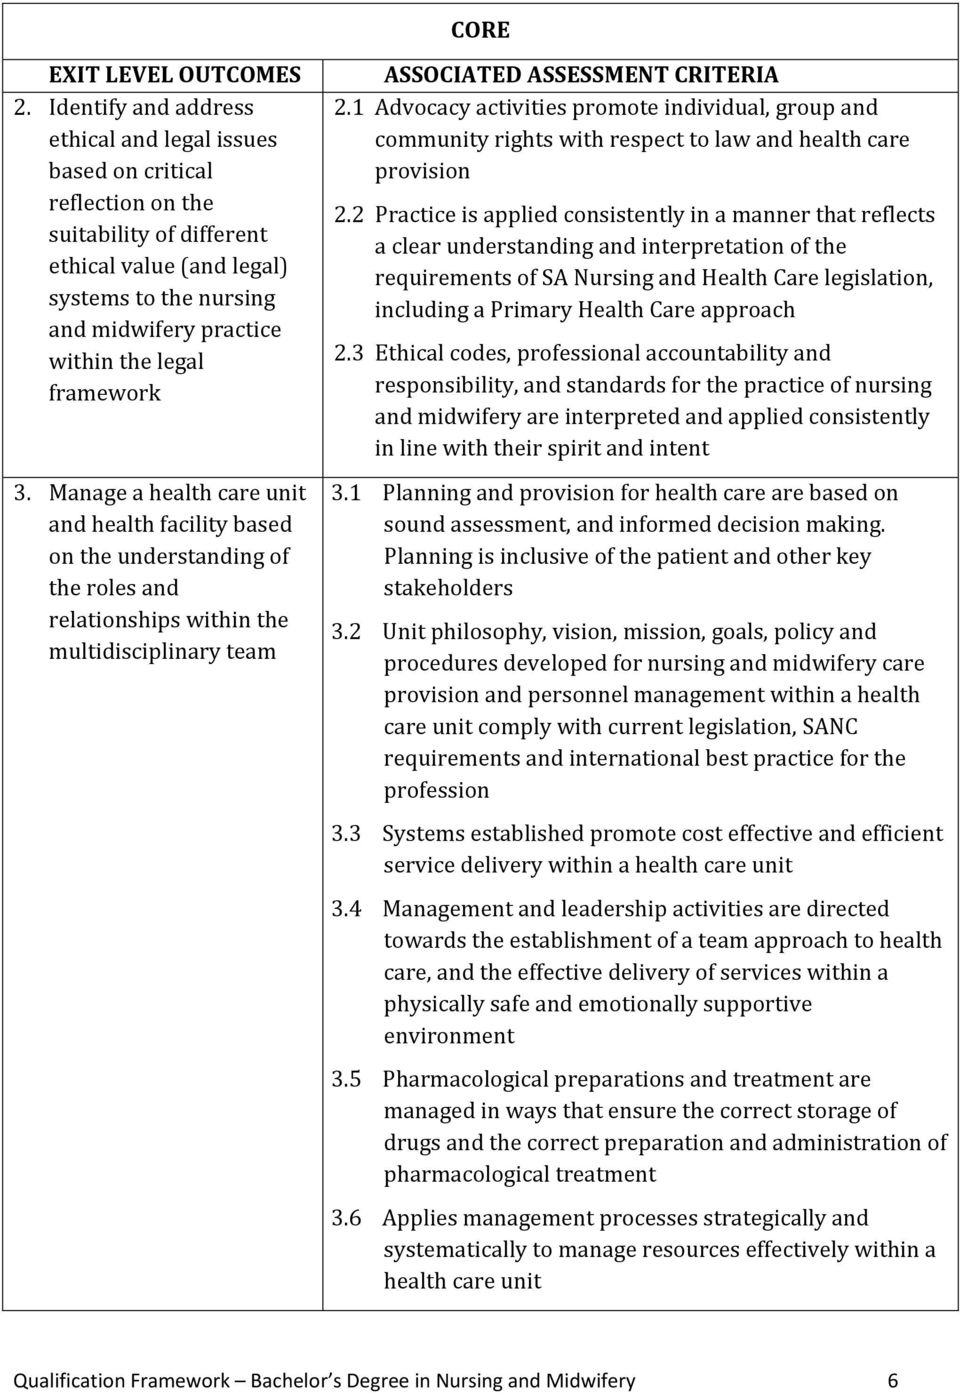 framework 3. Manage a health care unit and health facility based on the understanding of the roles and relationships within the multidisciplinary team ASSOCIATED ASSESSMENT CRITERIA 2.